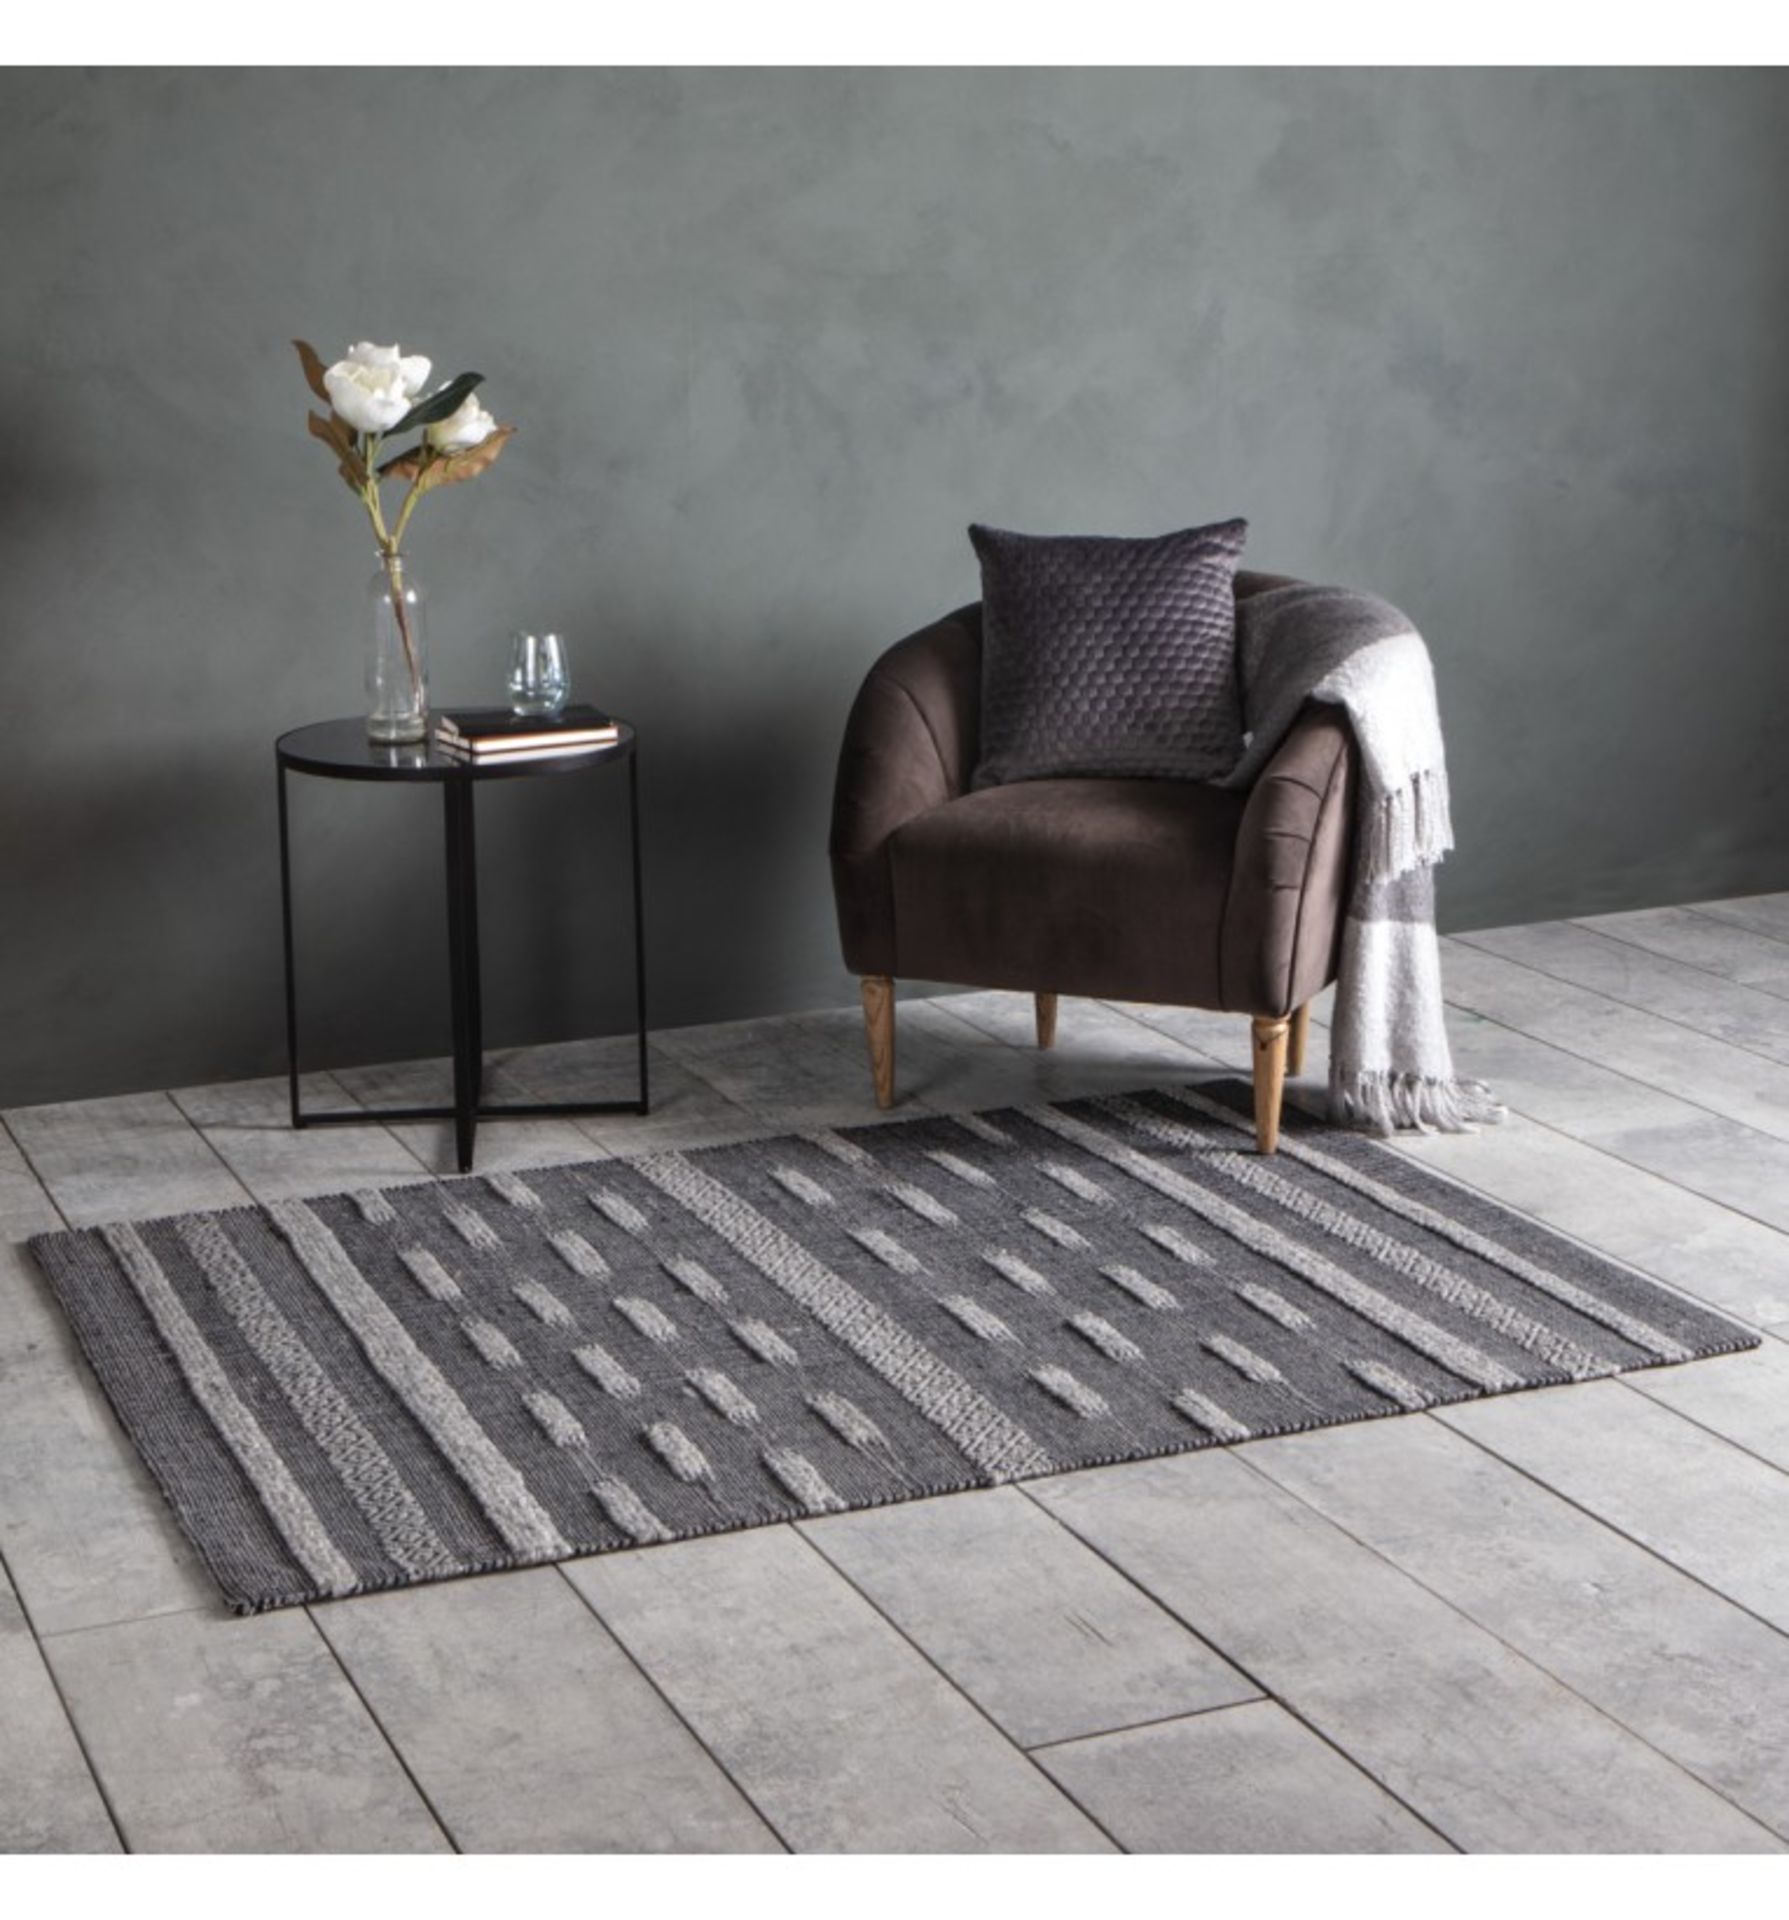 Alamo Rug Contemporary textured rug in a stylish two tone geometric stripe pattern, handmade using a